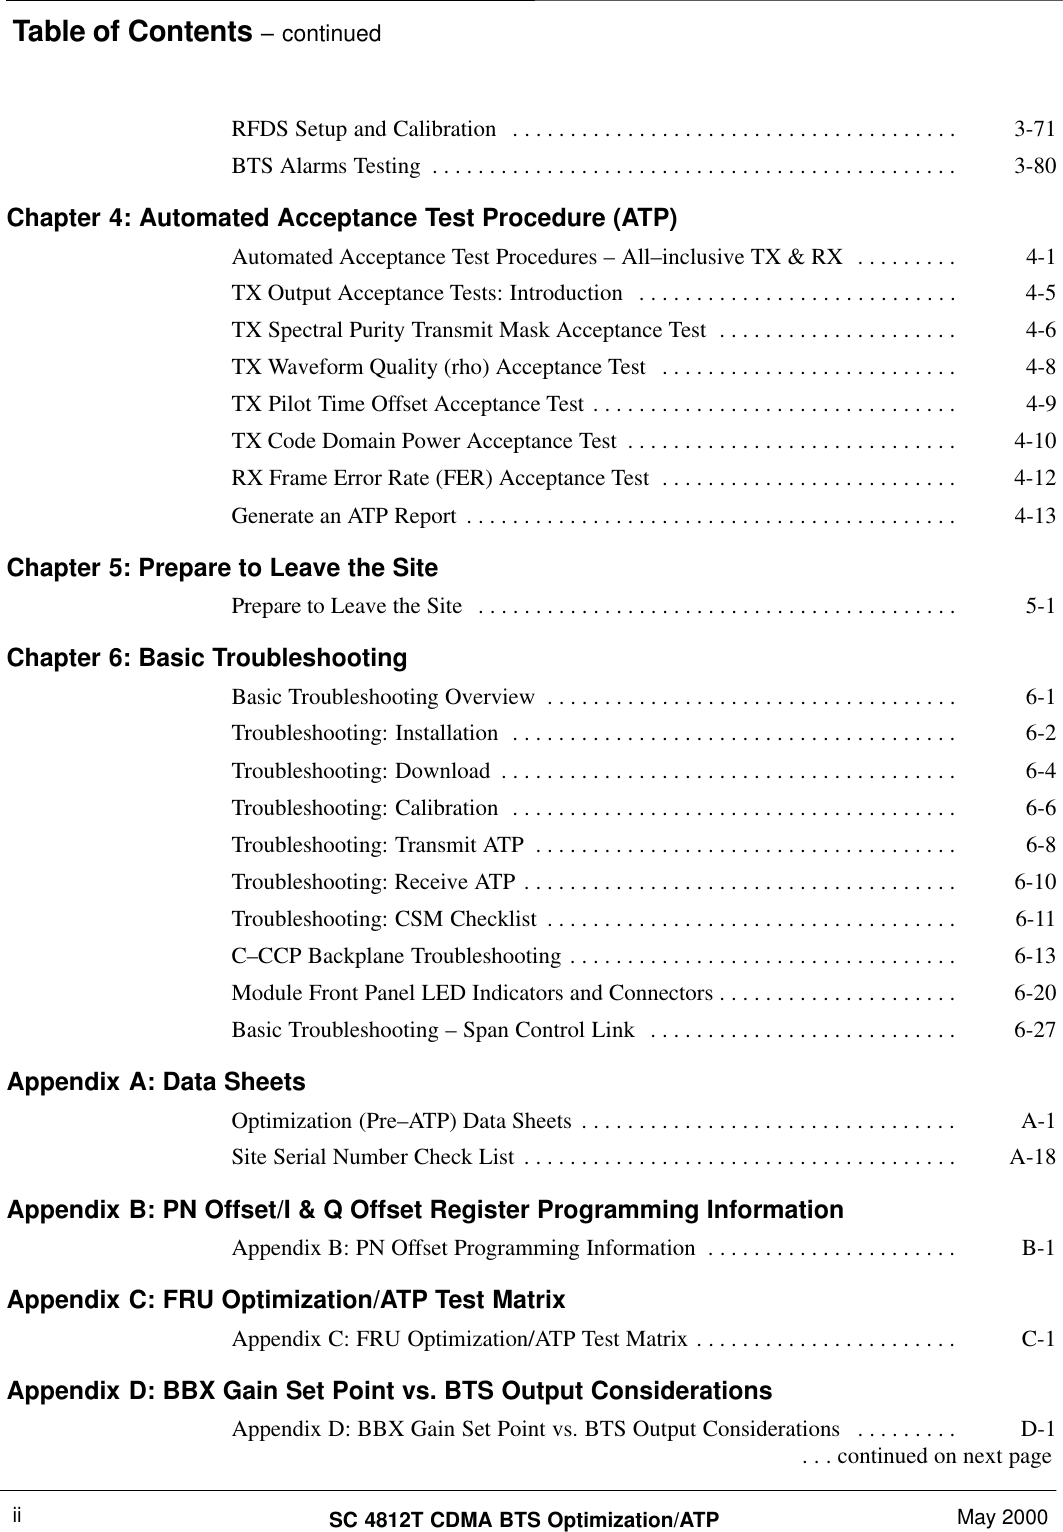 Table of Contents – continuedSC 4812T CDMA BTS Optimization/ATP May 2000iiRFDS Setup and Calibration 3-71. . . . . . . . . . . . . . . . . . . . . . . . . . . . . . . . . . . . . . . BTS Alarms Testing 3-80. . . . . . . . . . . . . . . . . . . . . . . . . . . . . . . . . . . . . . . . . . . . . . Chapter 4: Automated Acceptance Test Procedure (ATP)Automated Acceptance Test Procedures – All–inclusive TX &amp; RX 4-1. . . . . . . . . TX Output Acceptance Tests: Introduction 4-5. . . . . . . . . . . . . . . . . . . . . . . . . . . . TX Spectral Purity Transmit Mask Acceptance Test 4-6. . . . . . . . . . . . . . . . . . . . . TX Waveform Quality (rho) Acceptance Test 4-8. . . . . . . . . . . . . . . . . . . . . . . . . . TX Pilot Time Offset Acceptance Test 4-9. . . . . . . . . . . . . . . . . . . . . . . . . . . . . . . . TX Code Domain Power Acceptance Test 4-10. . . . . . . . . . . . . . . . . . . . . . . . . . . . . RX Frame Error Rate (FER) Acceptance Test 4-12. . . . . . . . . . . . . . . . . . . . . . . . . . Generate an ATP Report 4-13. . . . . . . . . . . . . . . . . . . . . . . . . . . . . . . . . . . . . . . . . . . Chapter 5: Prepare to Leave the SitePrepare to Leave the Site 5-1. . . . . . . . . . . . . . . . . . . . . . . . . . . . . . . . . . . . . . . . . . Chapter 6: Basic TroubleshootingBasic Troubleshooting Overview 6-1. . . . . . . . . . . . . . . . . . . . . . . . . . . . . . . . . . . . Troubleshooting: Installation 6-2. . . . . . . . . . . . . . . . . . . . . . . . . . . . . . . . . . . . . . . Troubleshooting: Download 6-4. . . . . . . . . . . . . . . . . . . . . . . . . . . . . . . . . . . . . . . . Troubleshooting: Calibration 6-6. . . . . . . . . . . . . . . . . . . . . . . . . . . . . . . . . . . . . . . Troubleshooting: Transmit ATP 6-8. . . . . . . . . . . . . . . . . . . . . . . . . . . . . . . . . . . . . Troubleshooting: Receive ATP 6-10. . . . . . . . . . . . . . . . . . . . . . . . . . . . . . . . . . . . . . Troubleshooting: CSM Checklist 6-11. . . . . . . . . . . . . . . . . . . . . . . . . . . . . . . . . . . . C–CCP Backplane Troubleshooting 6-13. . . . . . . . . . . . . . . . . . . . . . . . . . . . . . . . . . Module Front Panel LED Indicators and Connectors 6-20. . . . . . . . . . . . . . . . . . . . . Basic Troubleshooting – Span Control Link 6-27. . . . . . . . . . . . . . . . . . . . . . . . . . . Appendix A: Data SheetsOptimization (Pre–ATP) Data Sheets A-1. . . . . . . . . . . . . . . . . . . . . . . . . . . . . . . . . Site Serial Number Check List A-18. . . . . . . . . . . . . . . . . . . . . . . . . . . . . . . . . . . . . . Appendix B: PN Offset/I &amp; Q Offset Register Programming InformationAppendix B: PN Offset Programming Information B-1. . . . . . . . . . . . . . . . . . . . . . Appendix C: FRU Optimization/ATP Test MatrixAppendix C: FRU Optimization/ATP Test Matrix C-1. . . . . . . . . . . . . . . . . . . . . . . Appendix D: BBX Gain Set Point vs. BTS Output ConsiderationsAppendix D: BBX Gain Set Point vs. BTS Output Considerations D-1. . . . . . . . .  . . . continued on next page